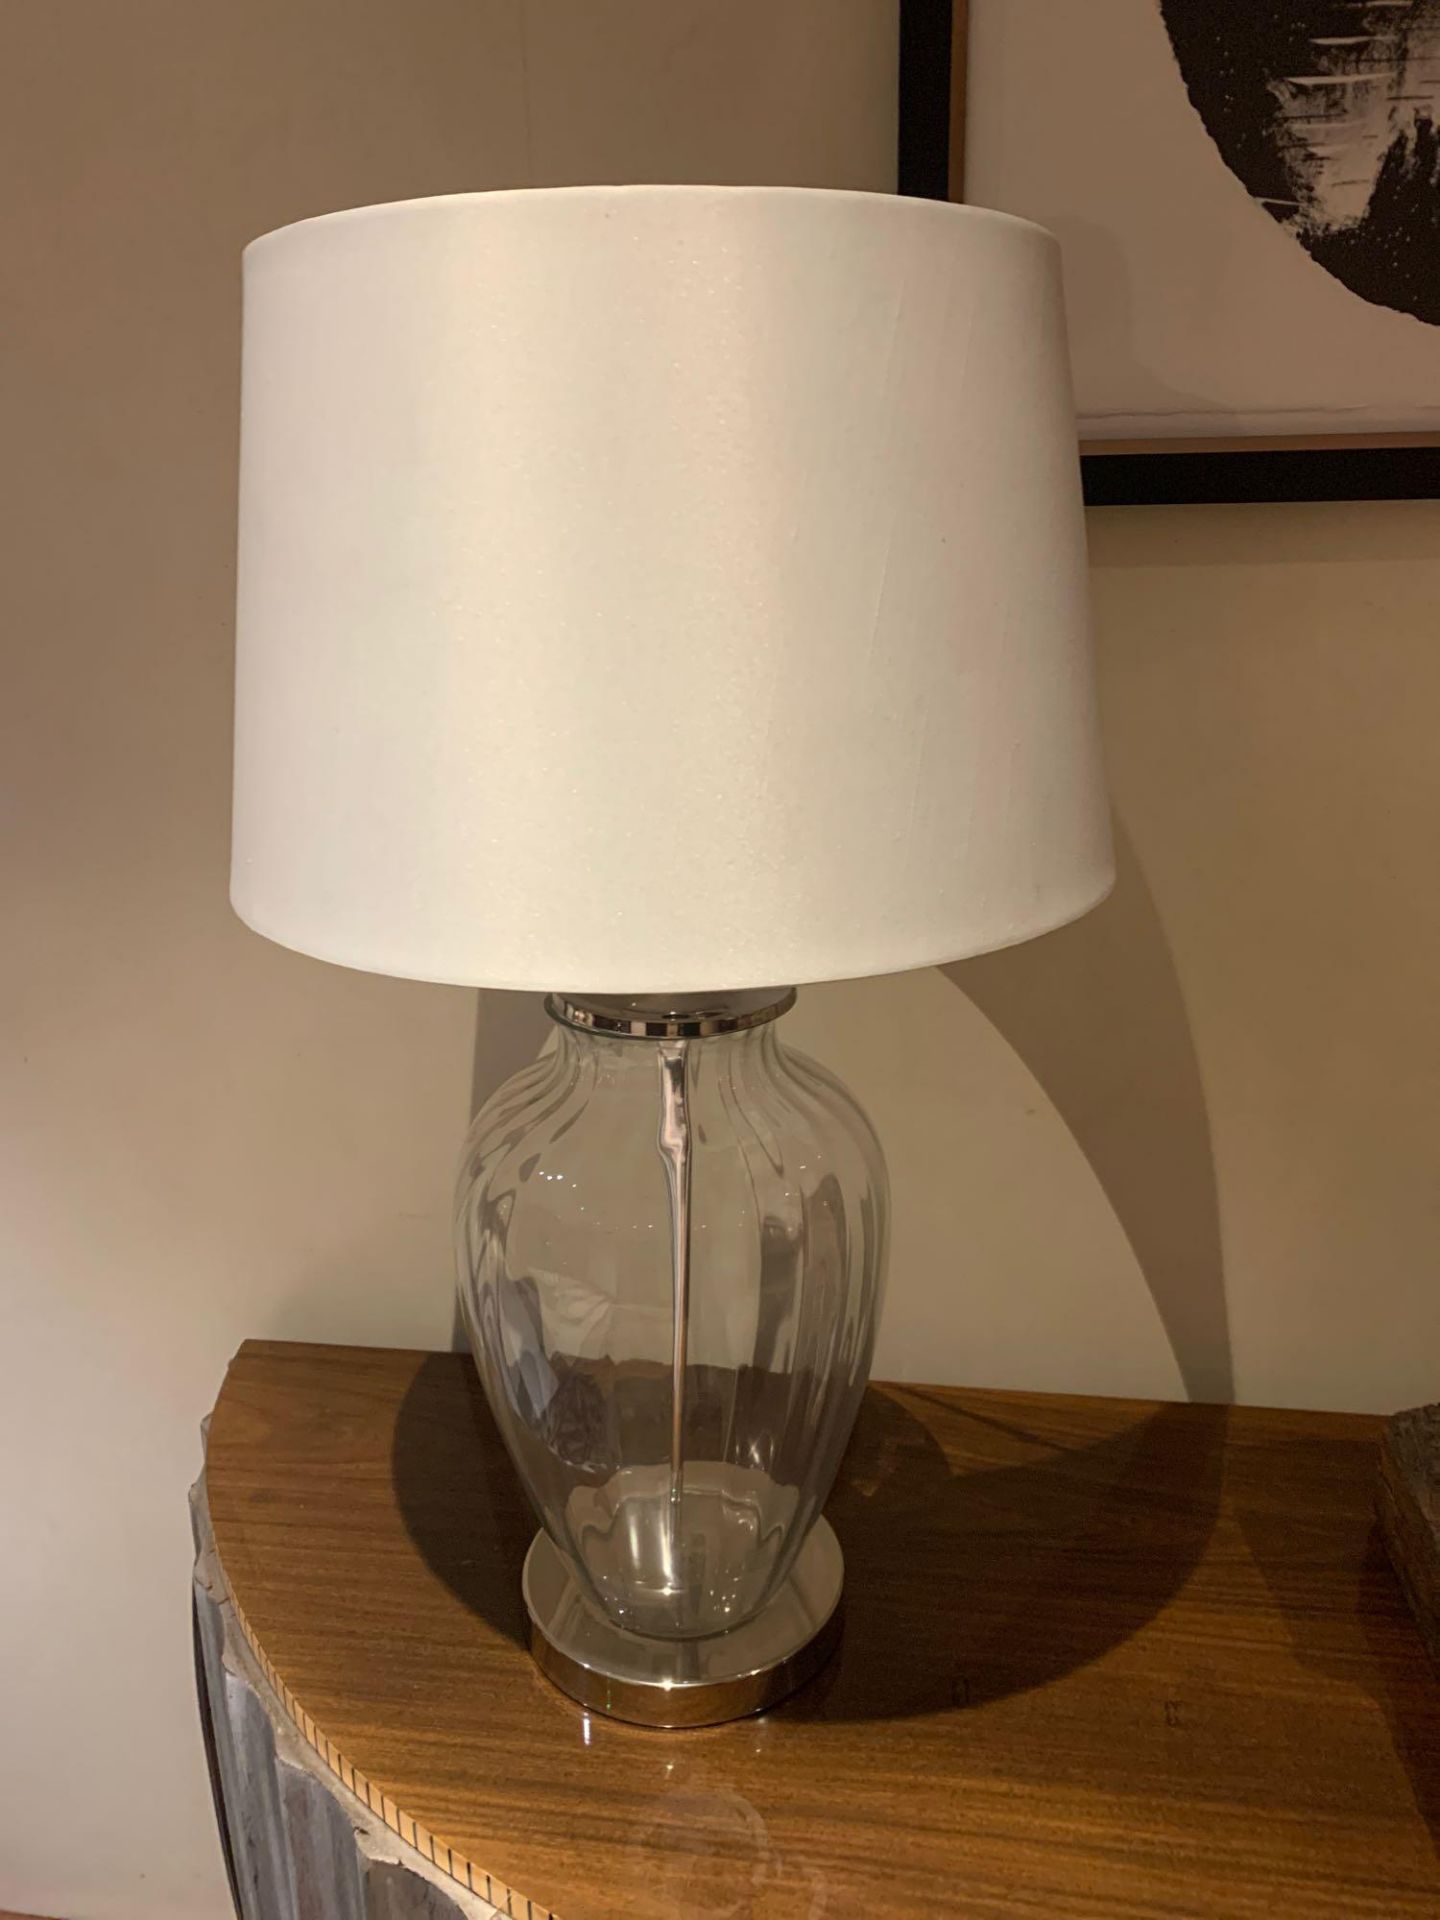 A Pair Of R V Astley Caballo Table Lamp 5178 ( Including Shade ) The Caballo Glass Table Lamp With - Image 3 of 4